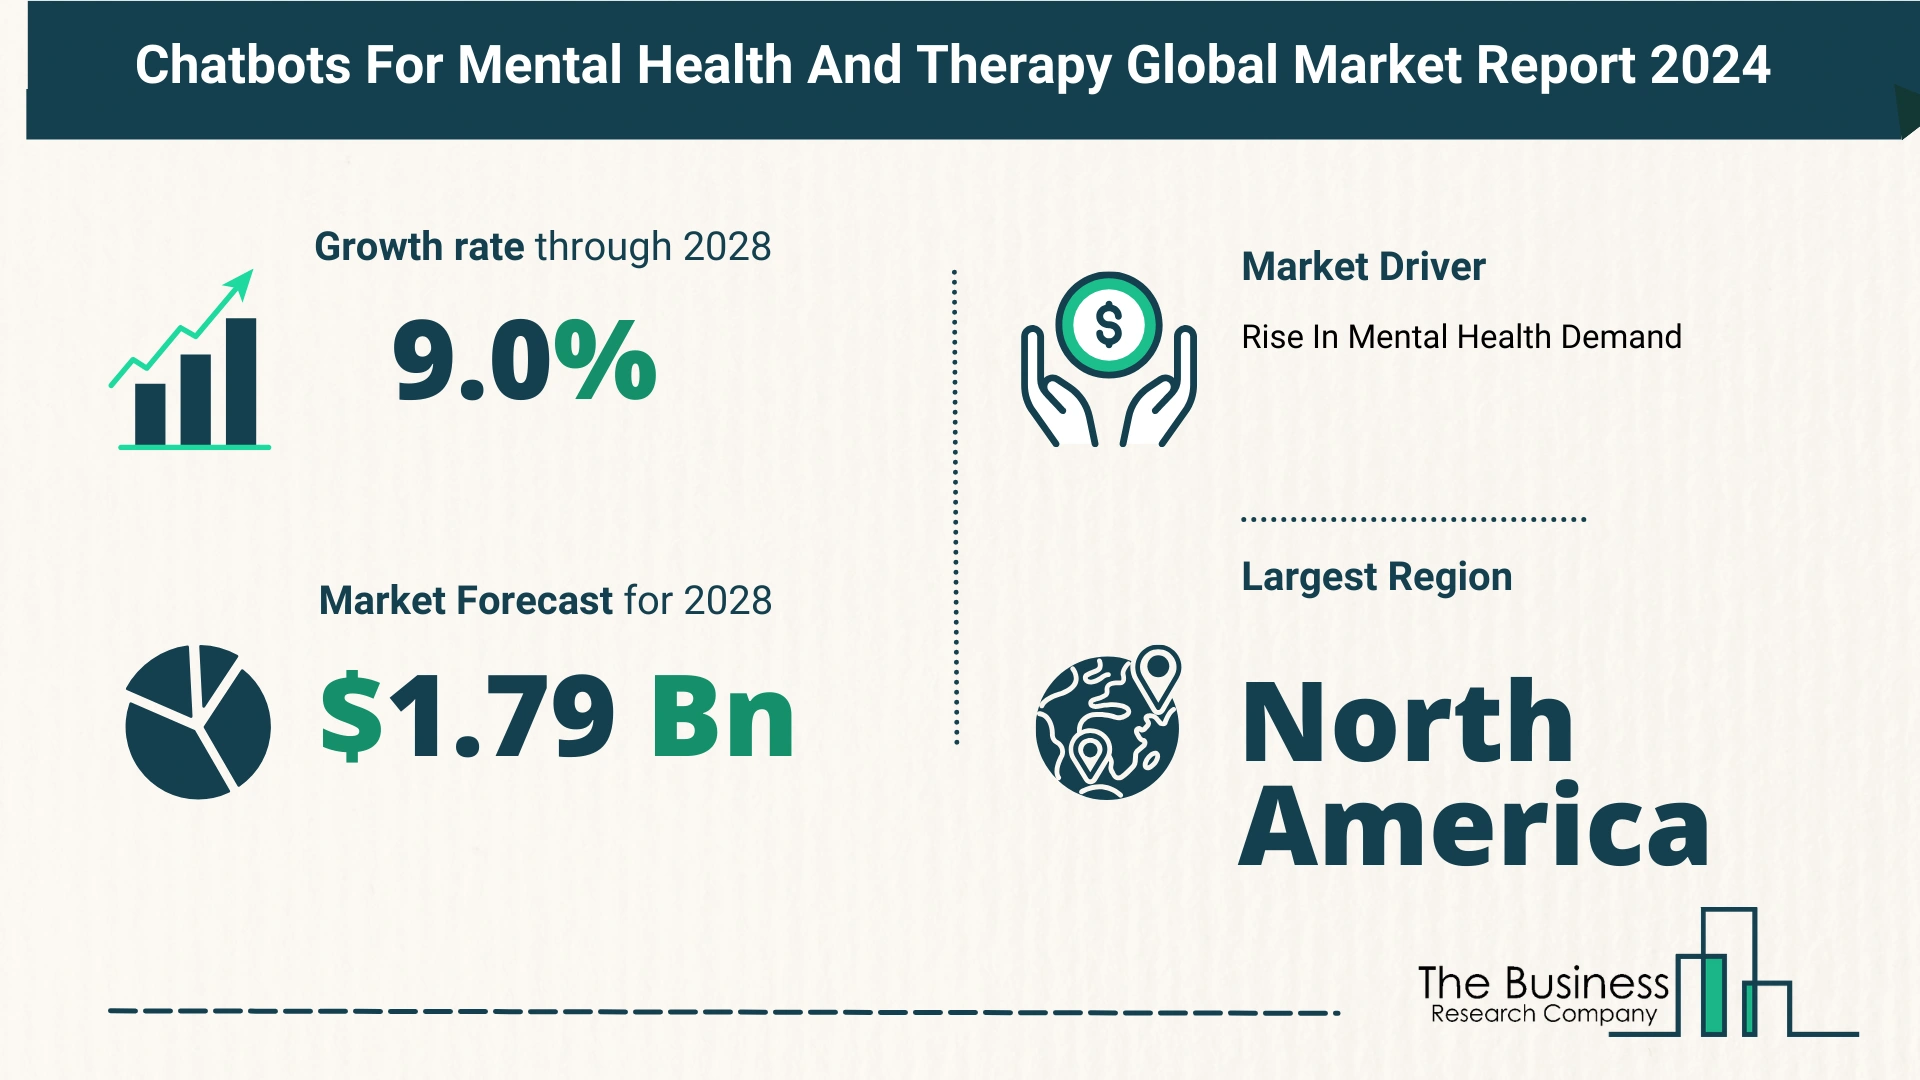 5 Key Insights On The Chatbots For Mental Health And Therapy Market 2024